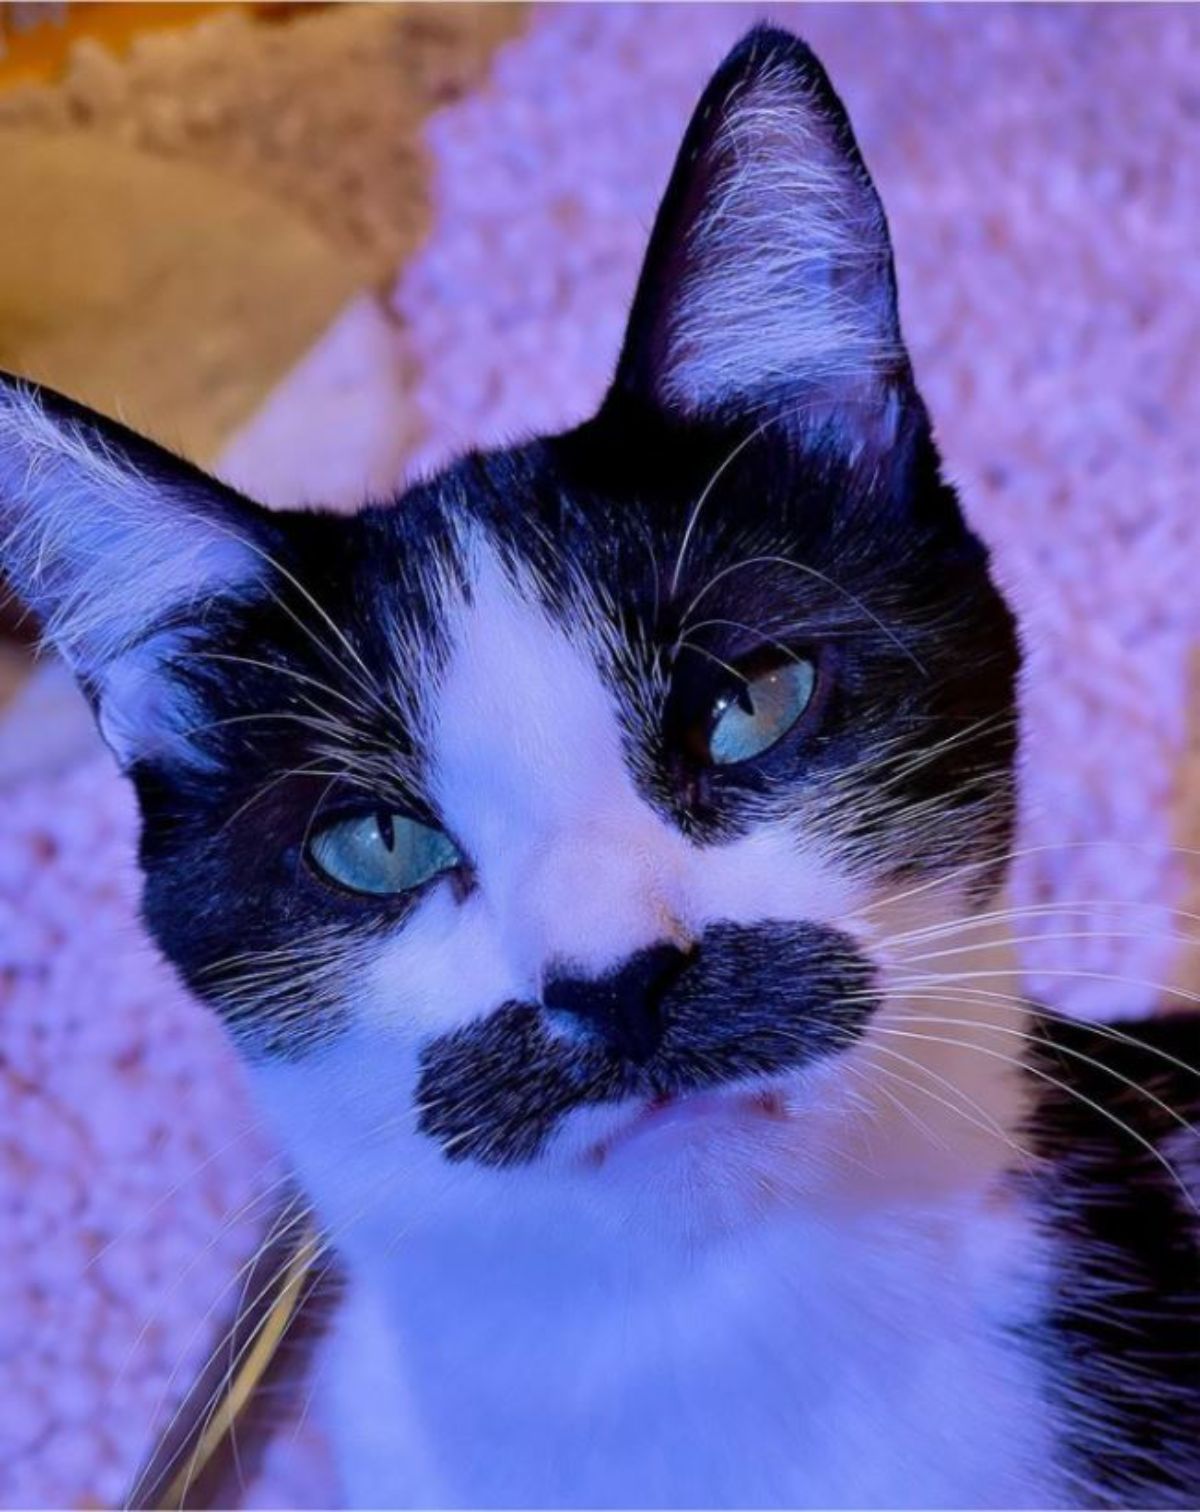 black and white cat with a black moustache looking at someone disapprovingly lit by blue light